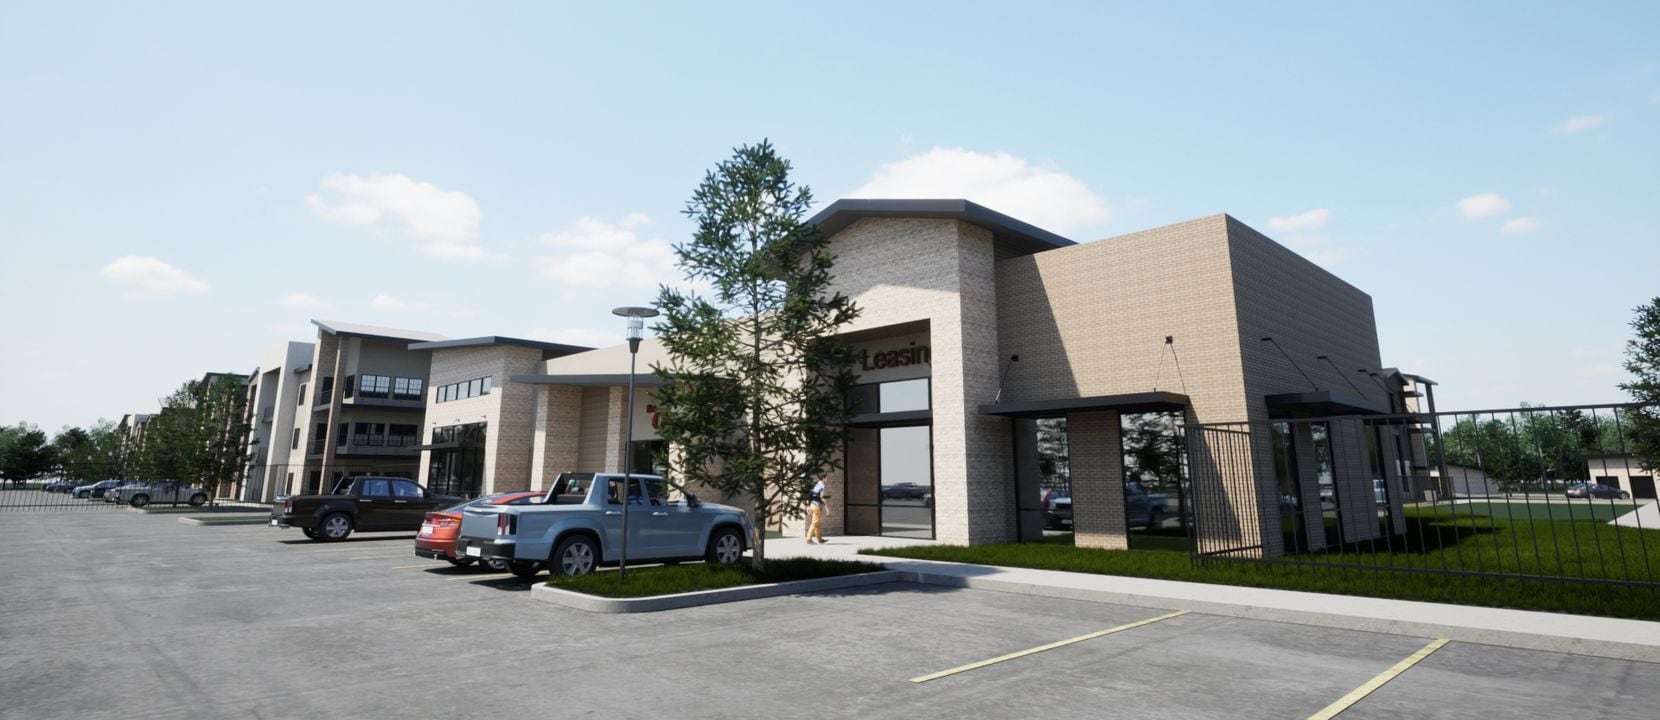 The Eastwood Village apartments in Melissa will include 10 buildings and a community center...